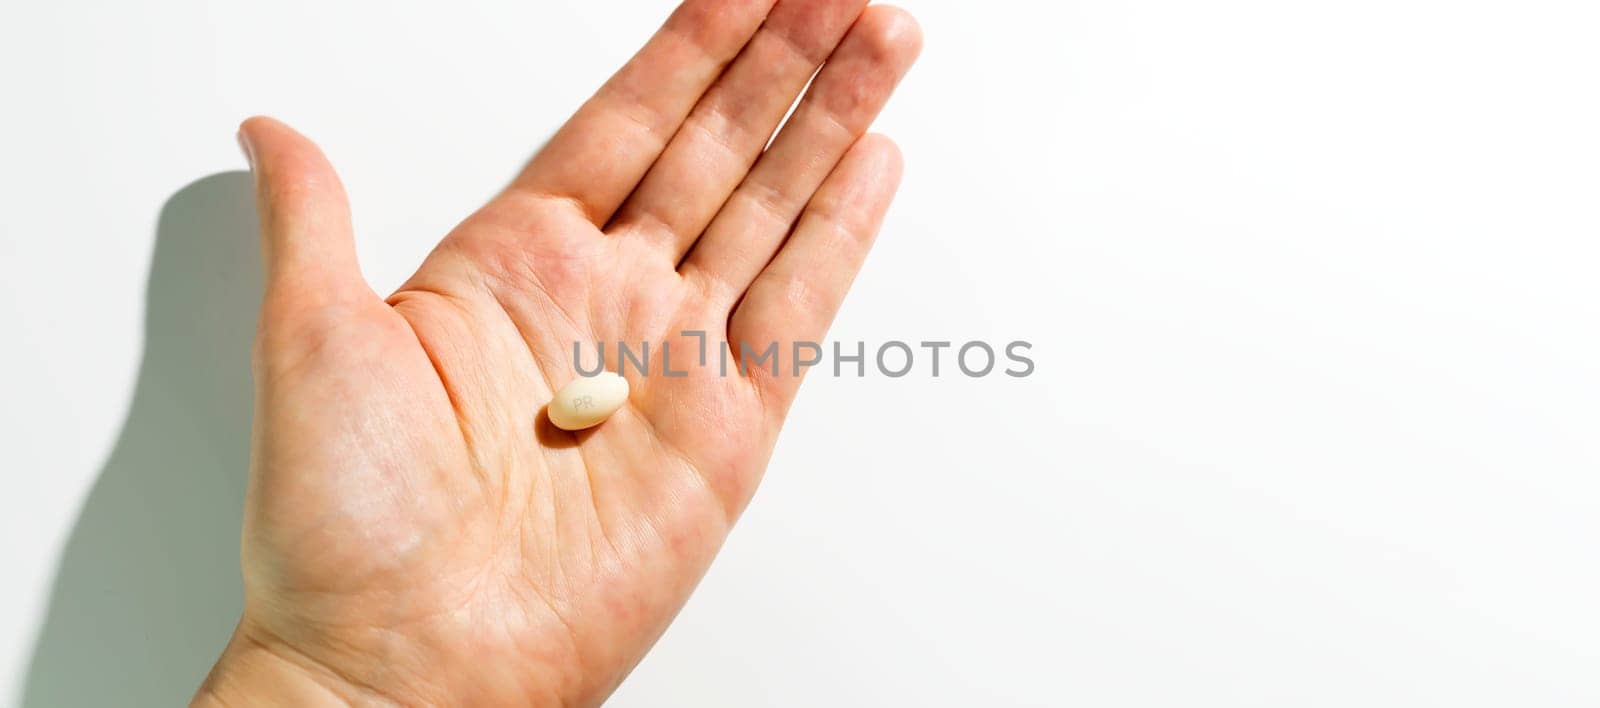 Design Progesterone Pill, Capsules In Human Hand On White Background. Dose Of Medications Treats Irregular Menstrual Cycle, Fertility Treatments, Menopausal Hormone Therapy, Horizontal Copy Space by netatsi